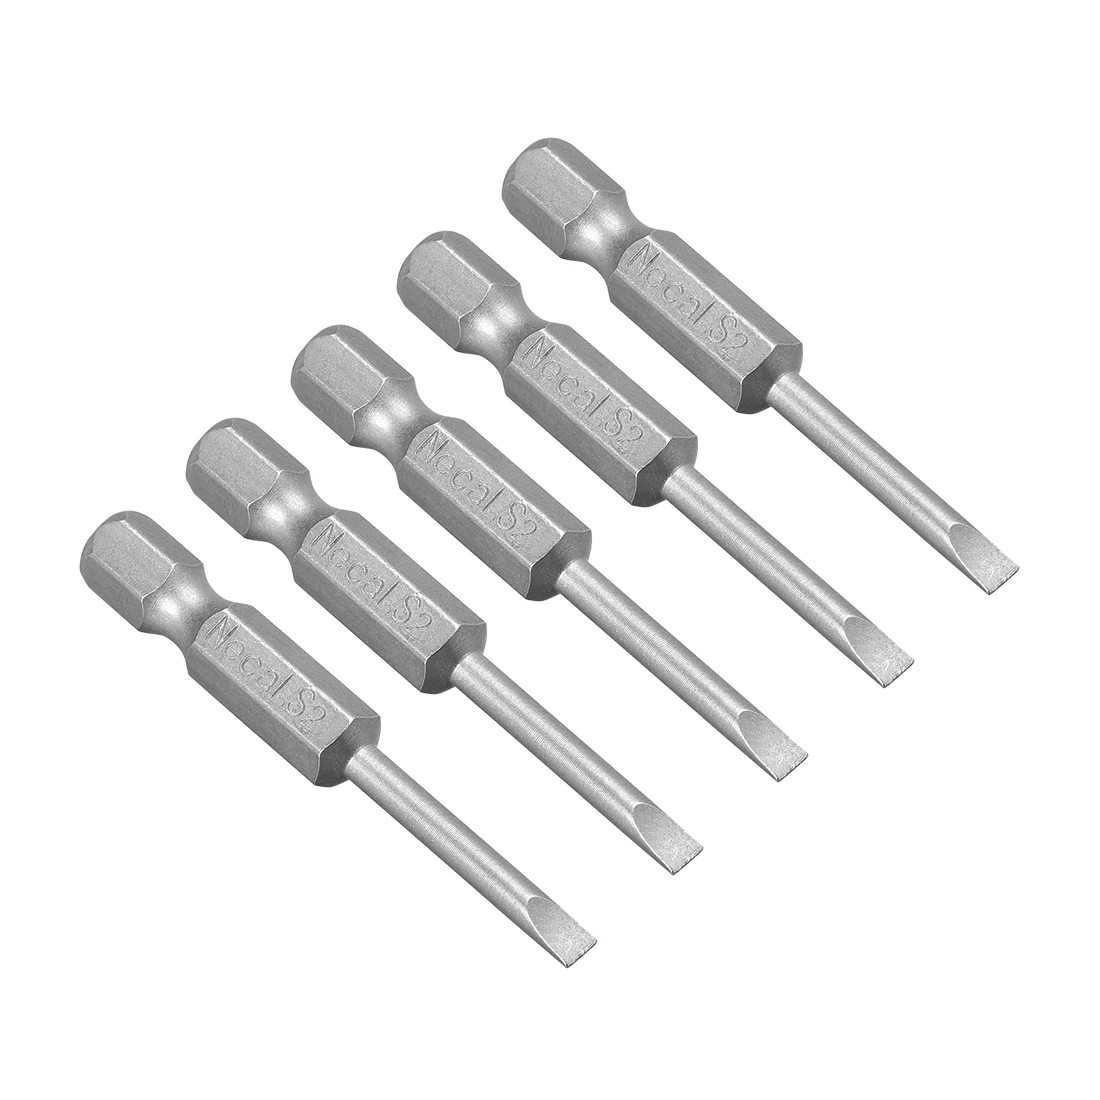 

uxcell 5 Pcs 3mm Slotted Tip Magnetic Flat Head Screwdriver Bits, 1/4 Inch Hex Shank 2-inch Length S2 Power Tool